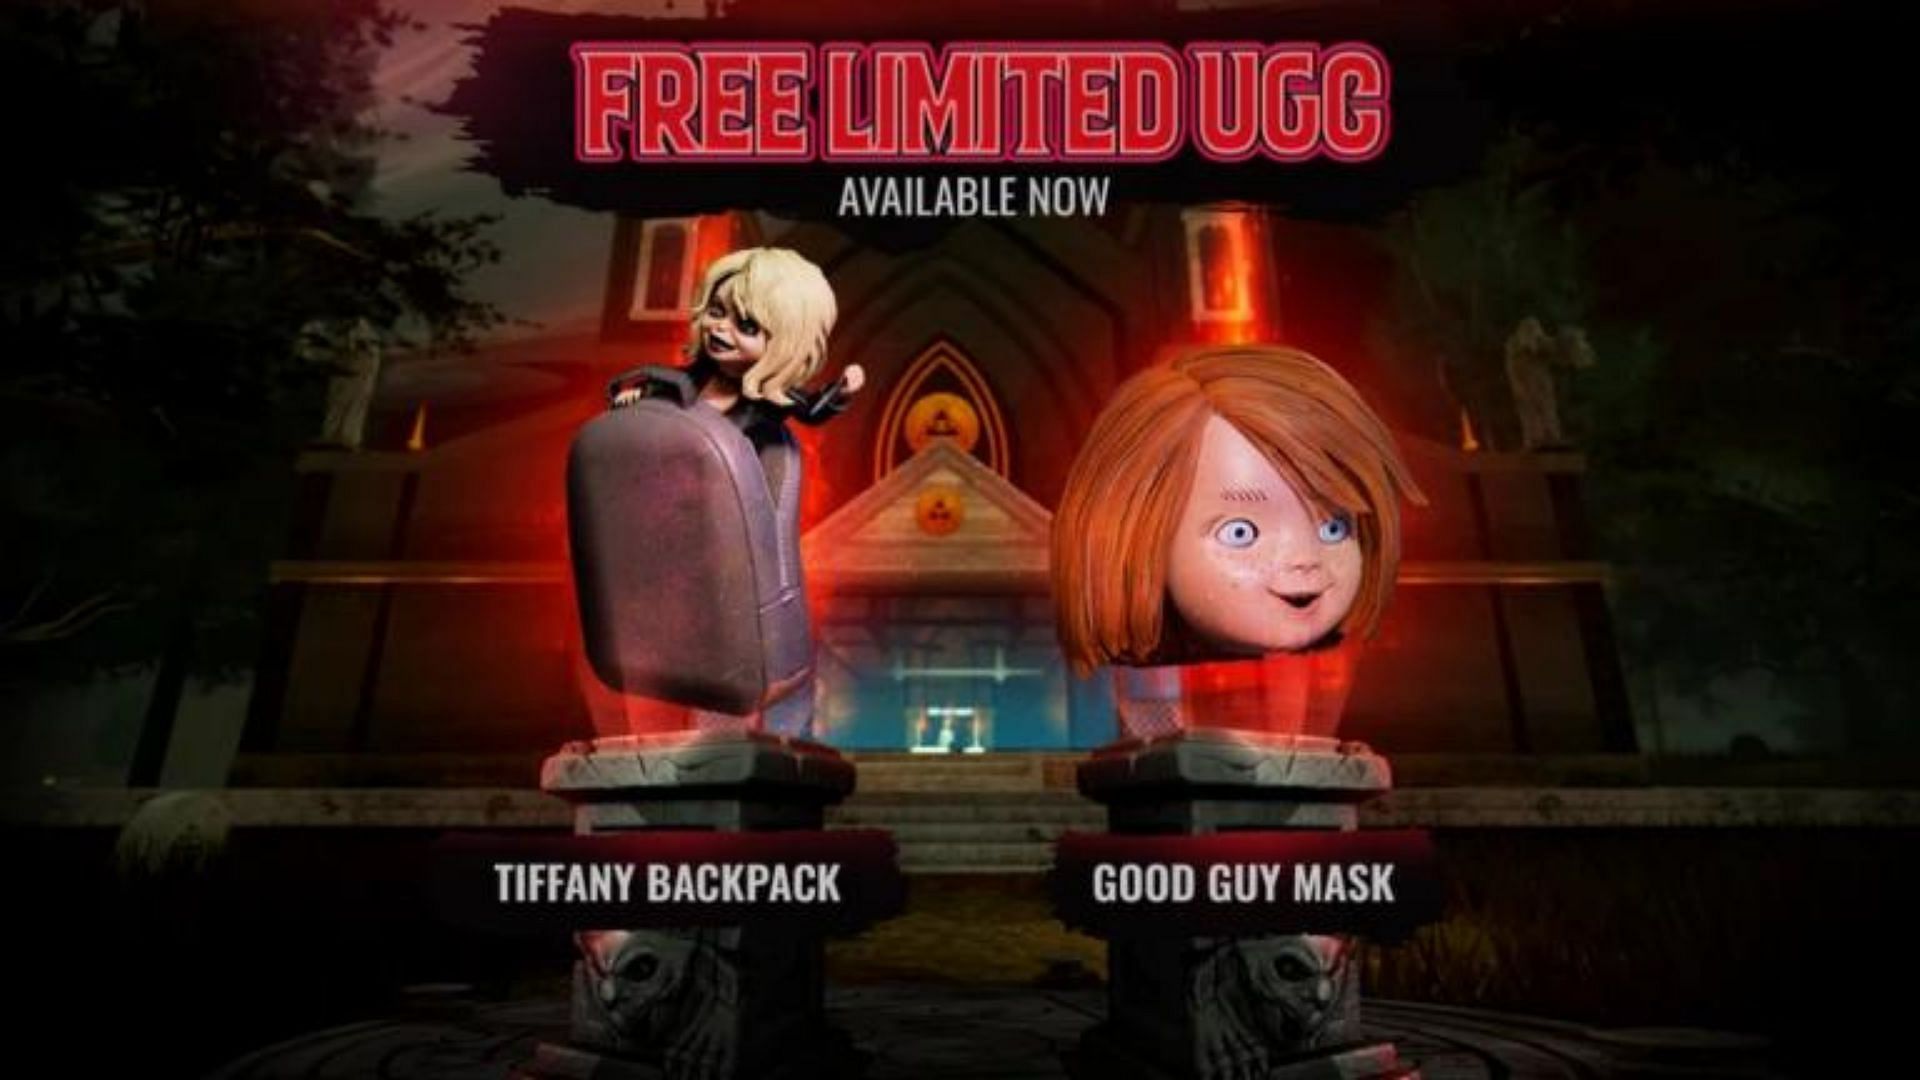 The new update came live along with the Tiffany Backpack UGC (Image via Roblox||Sportskeeda)